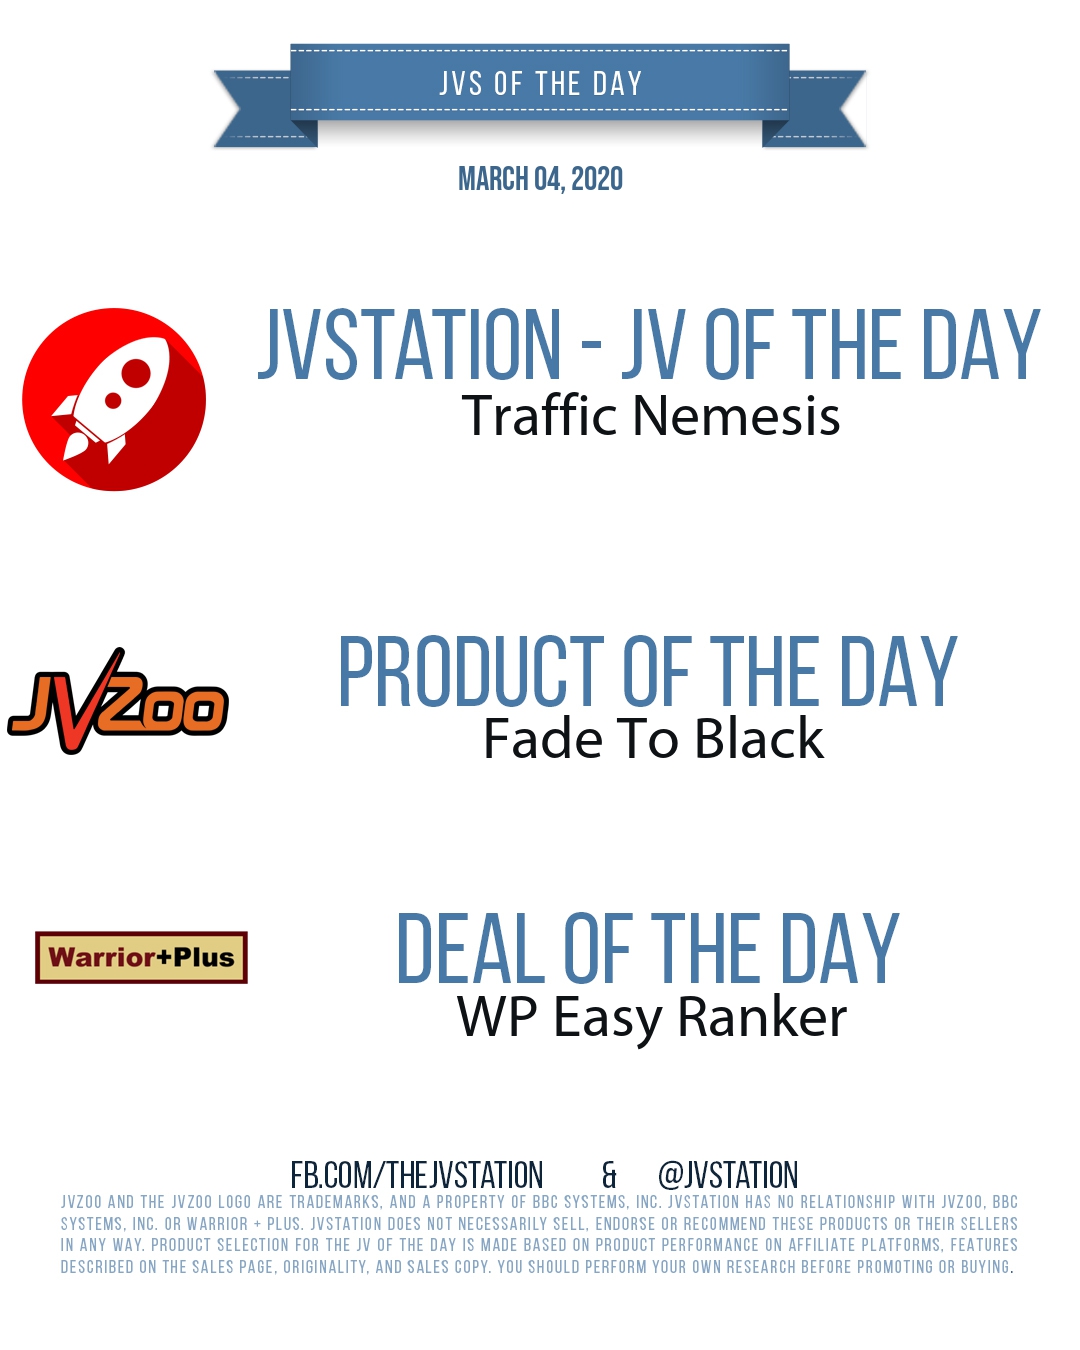 JVs of the day - March 04, 2020